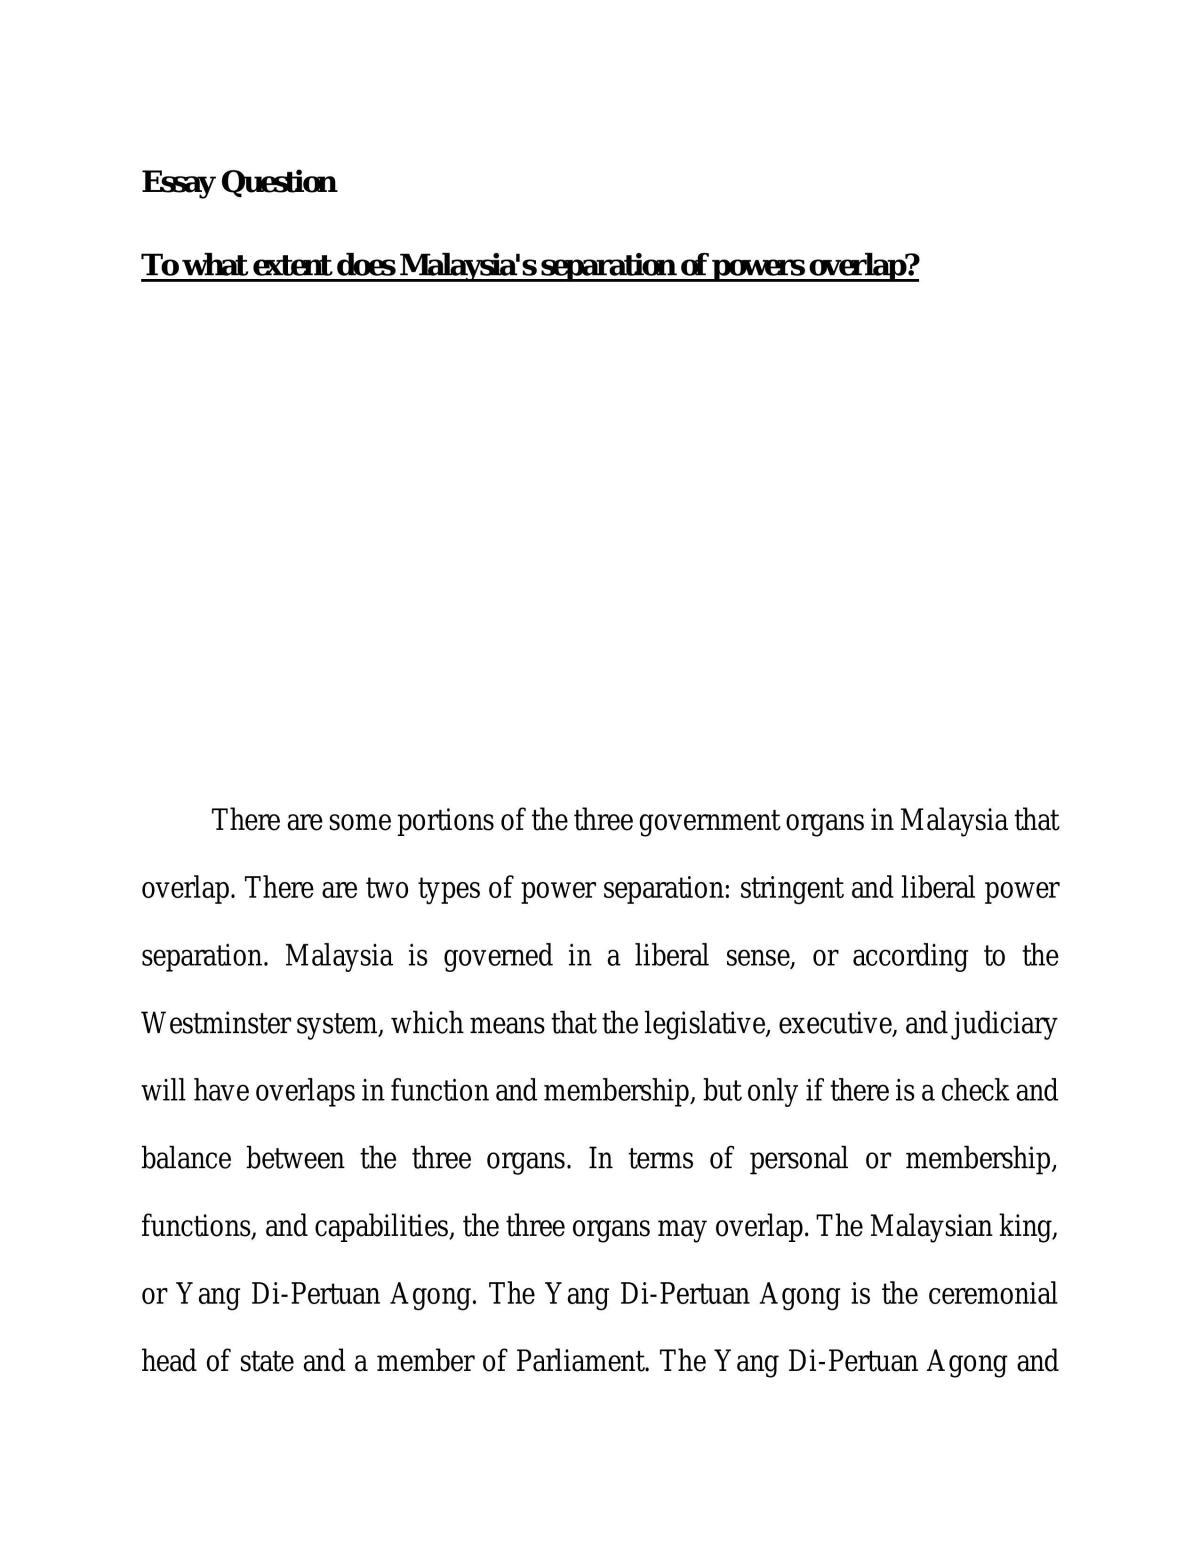 Separation of powers overlaps in Malaysia  - Page 1